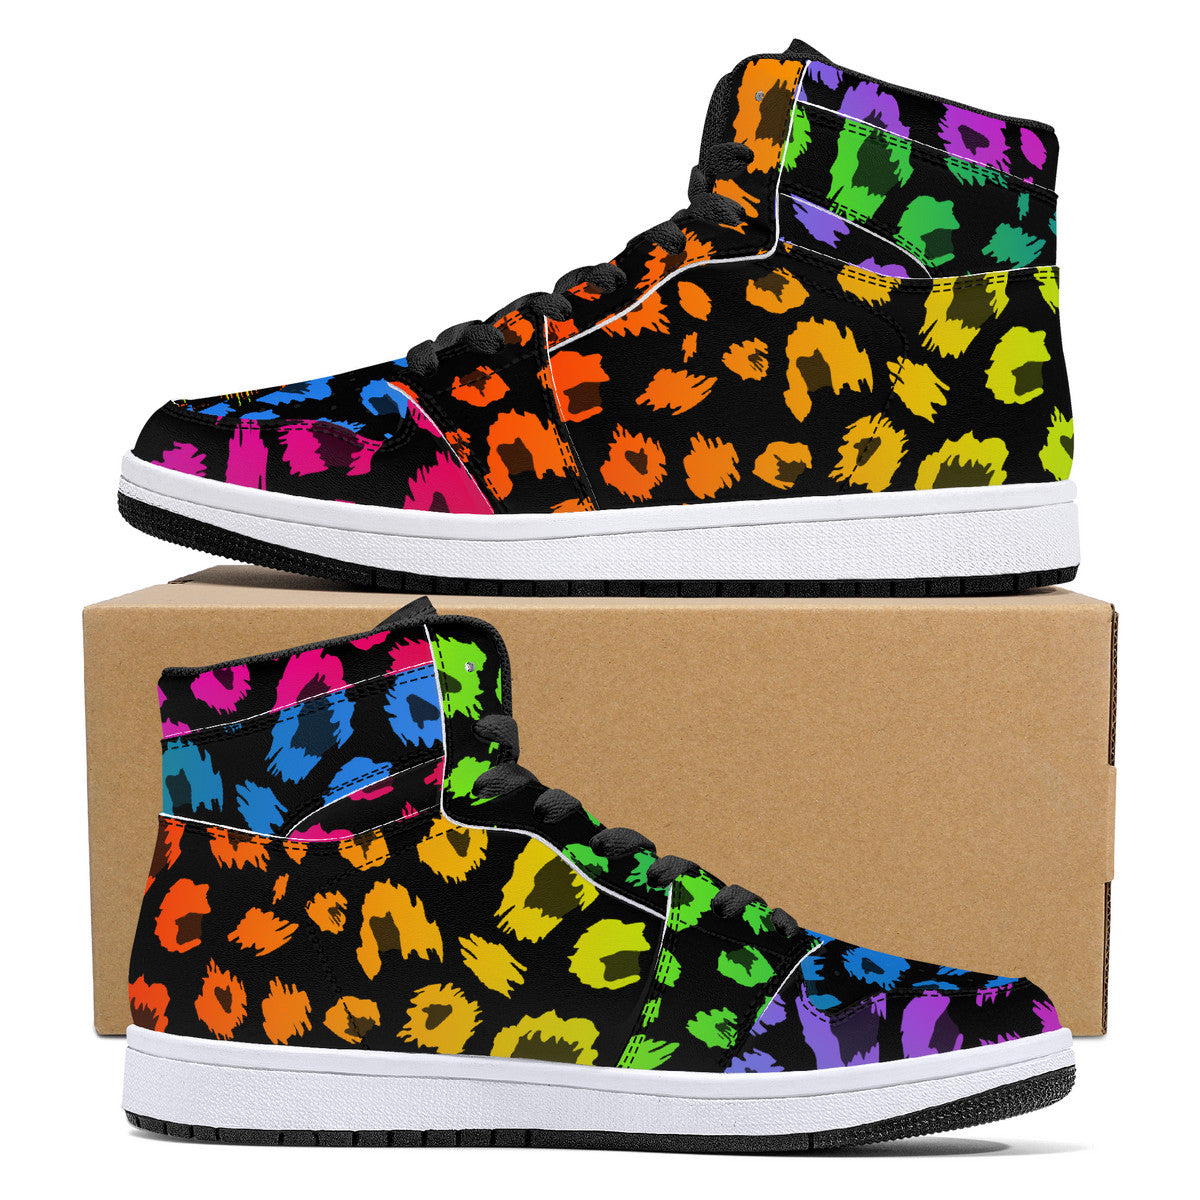 "Jaguar" High-Top Synthetic Leather Sneakers